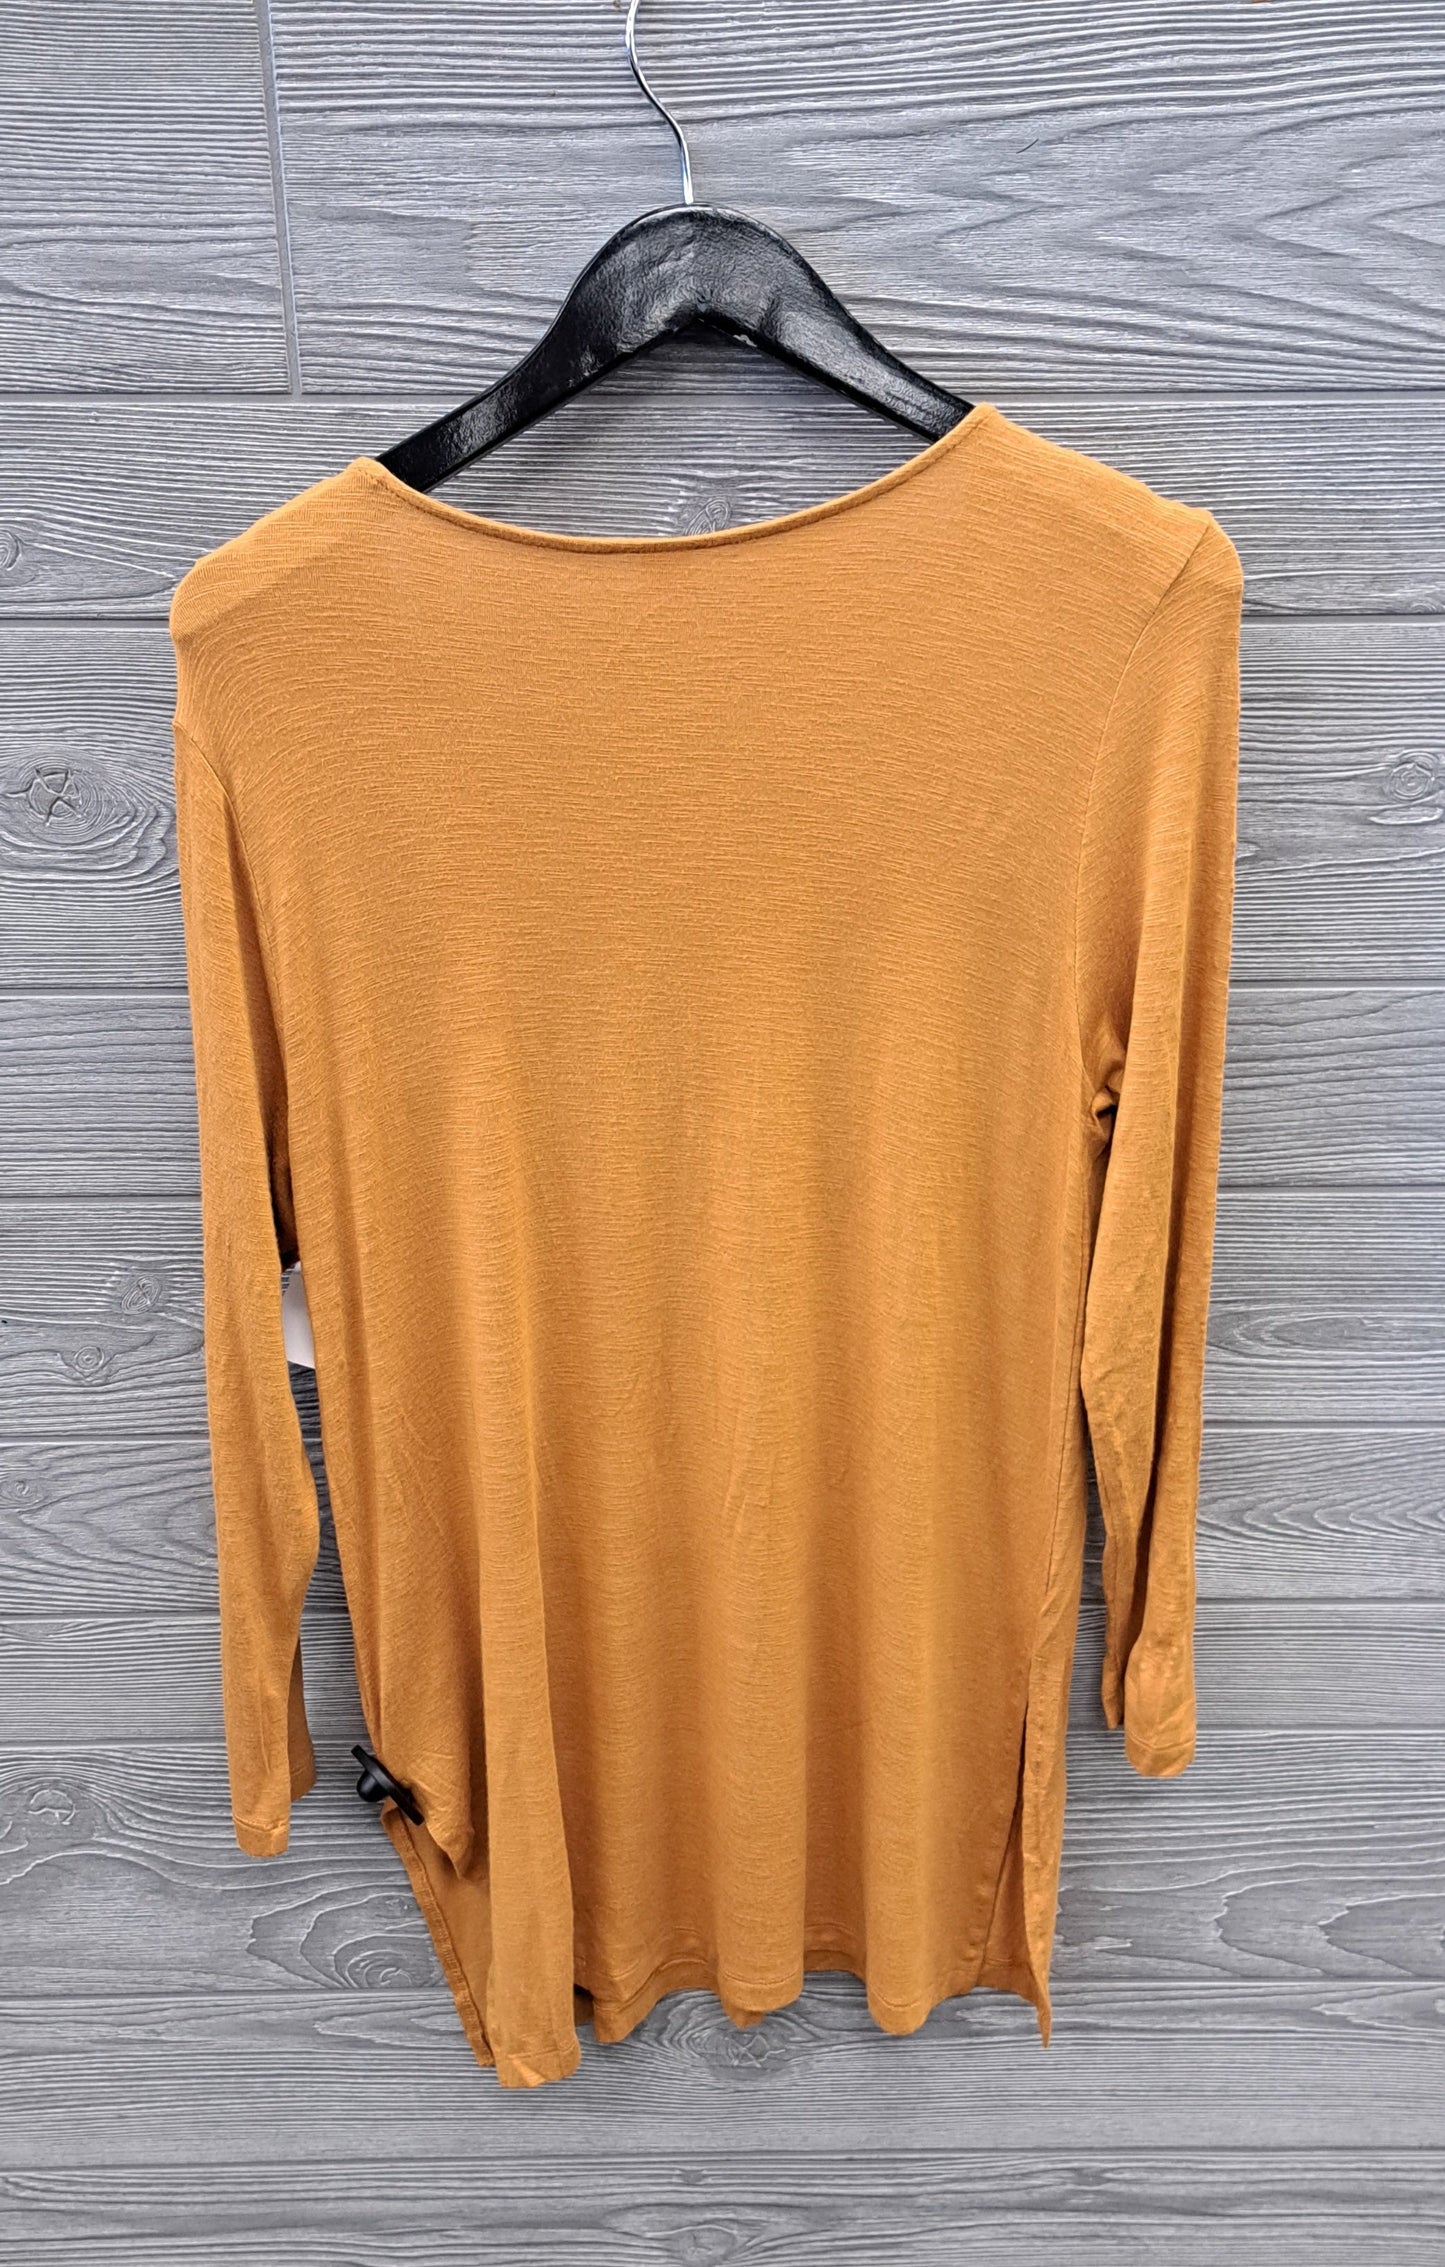 Yellow Top Long Sleeve Old Navy, Size M